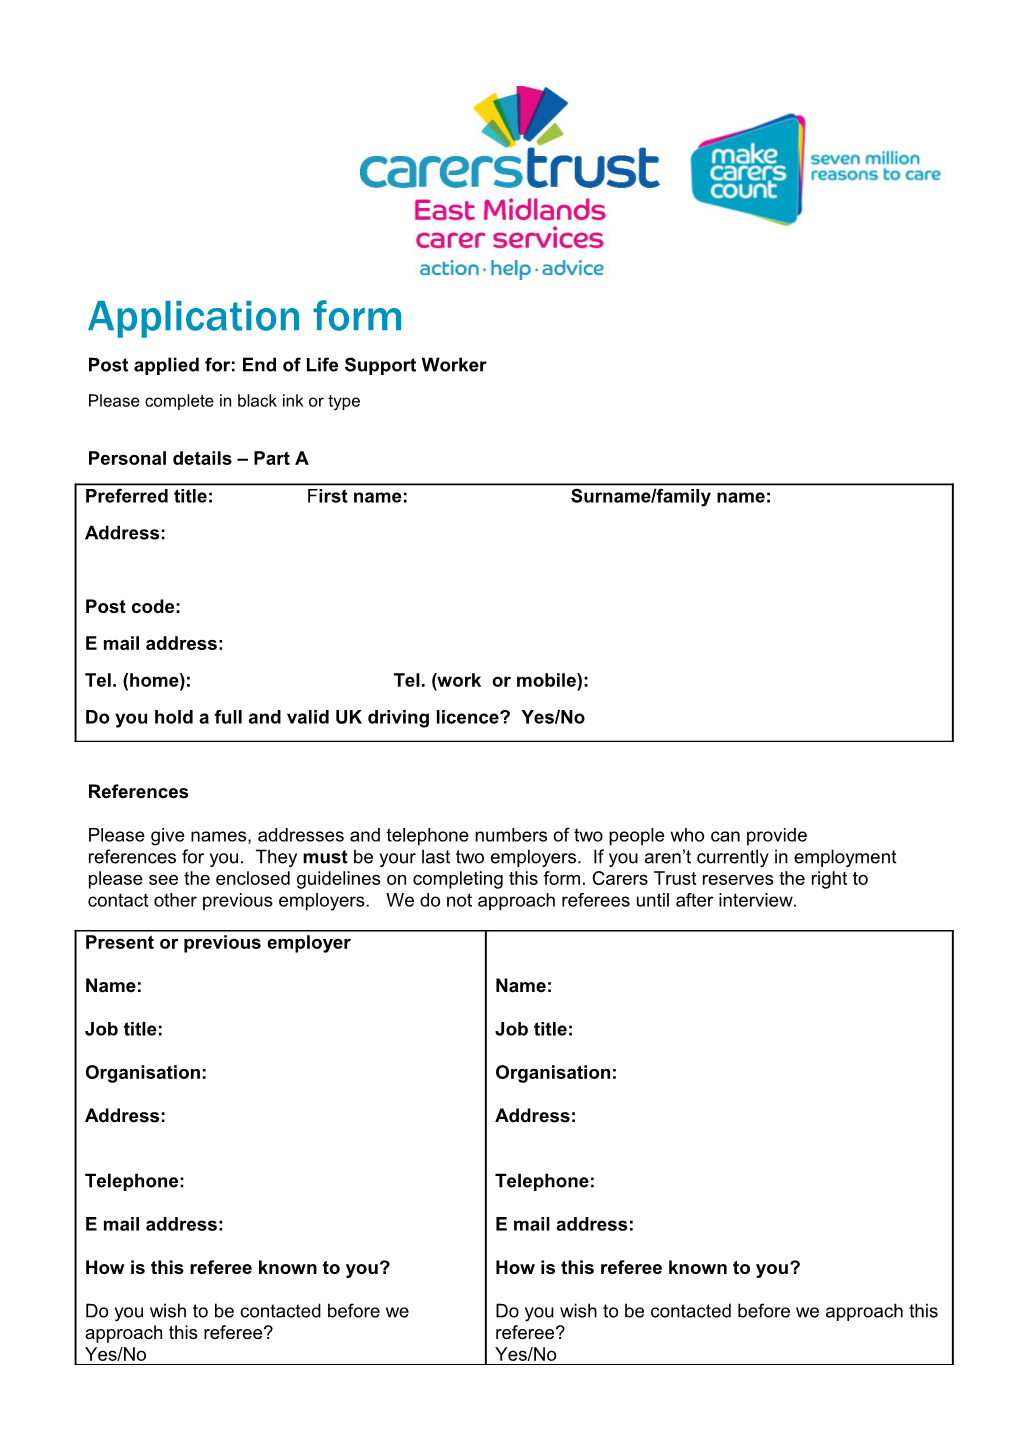 Post Applied For: End of Life Support Worker